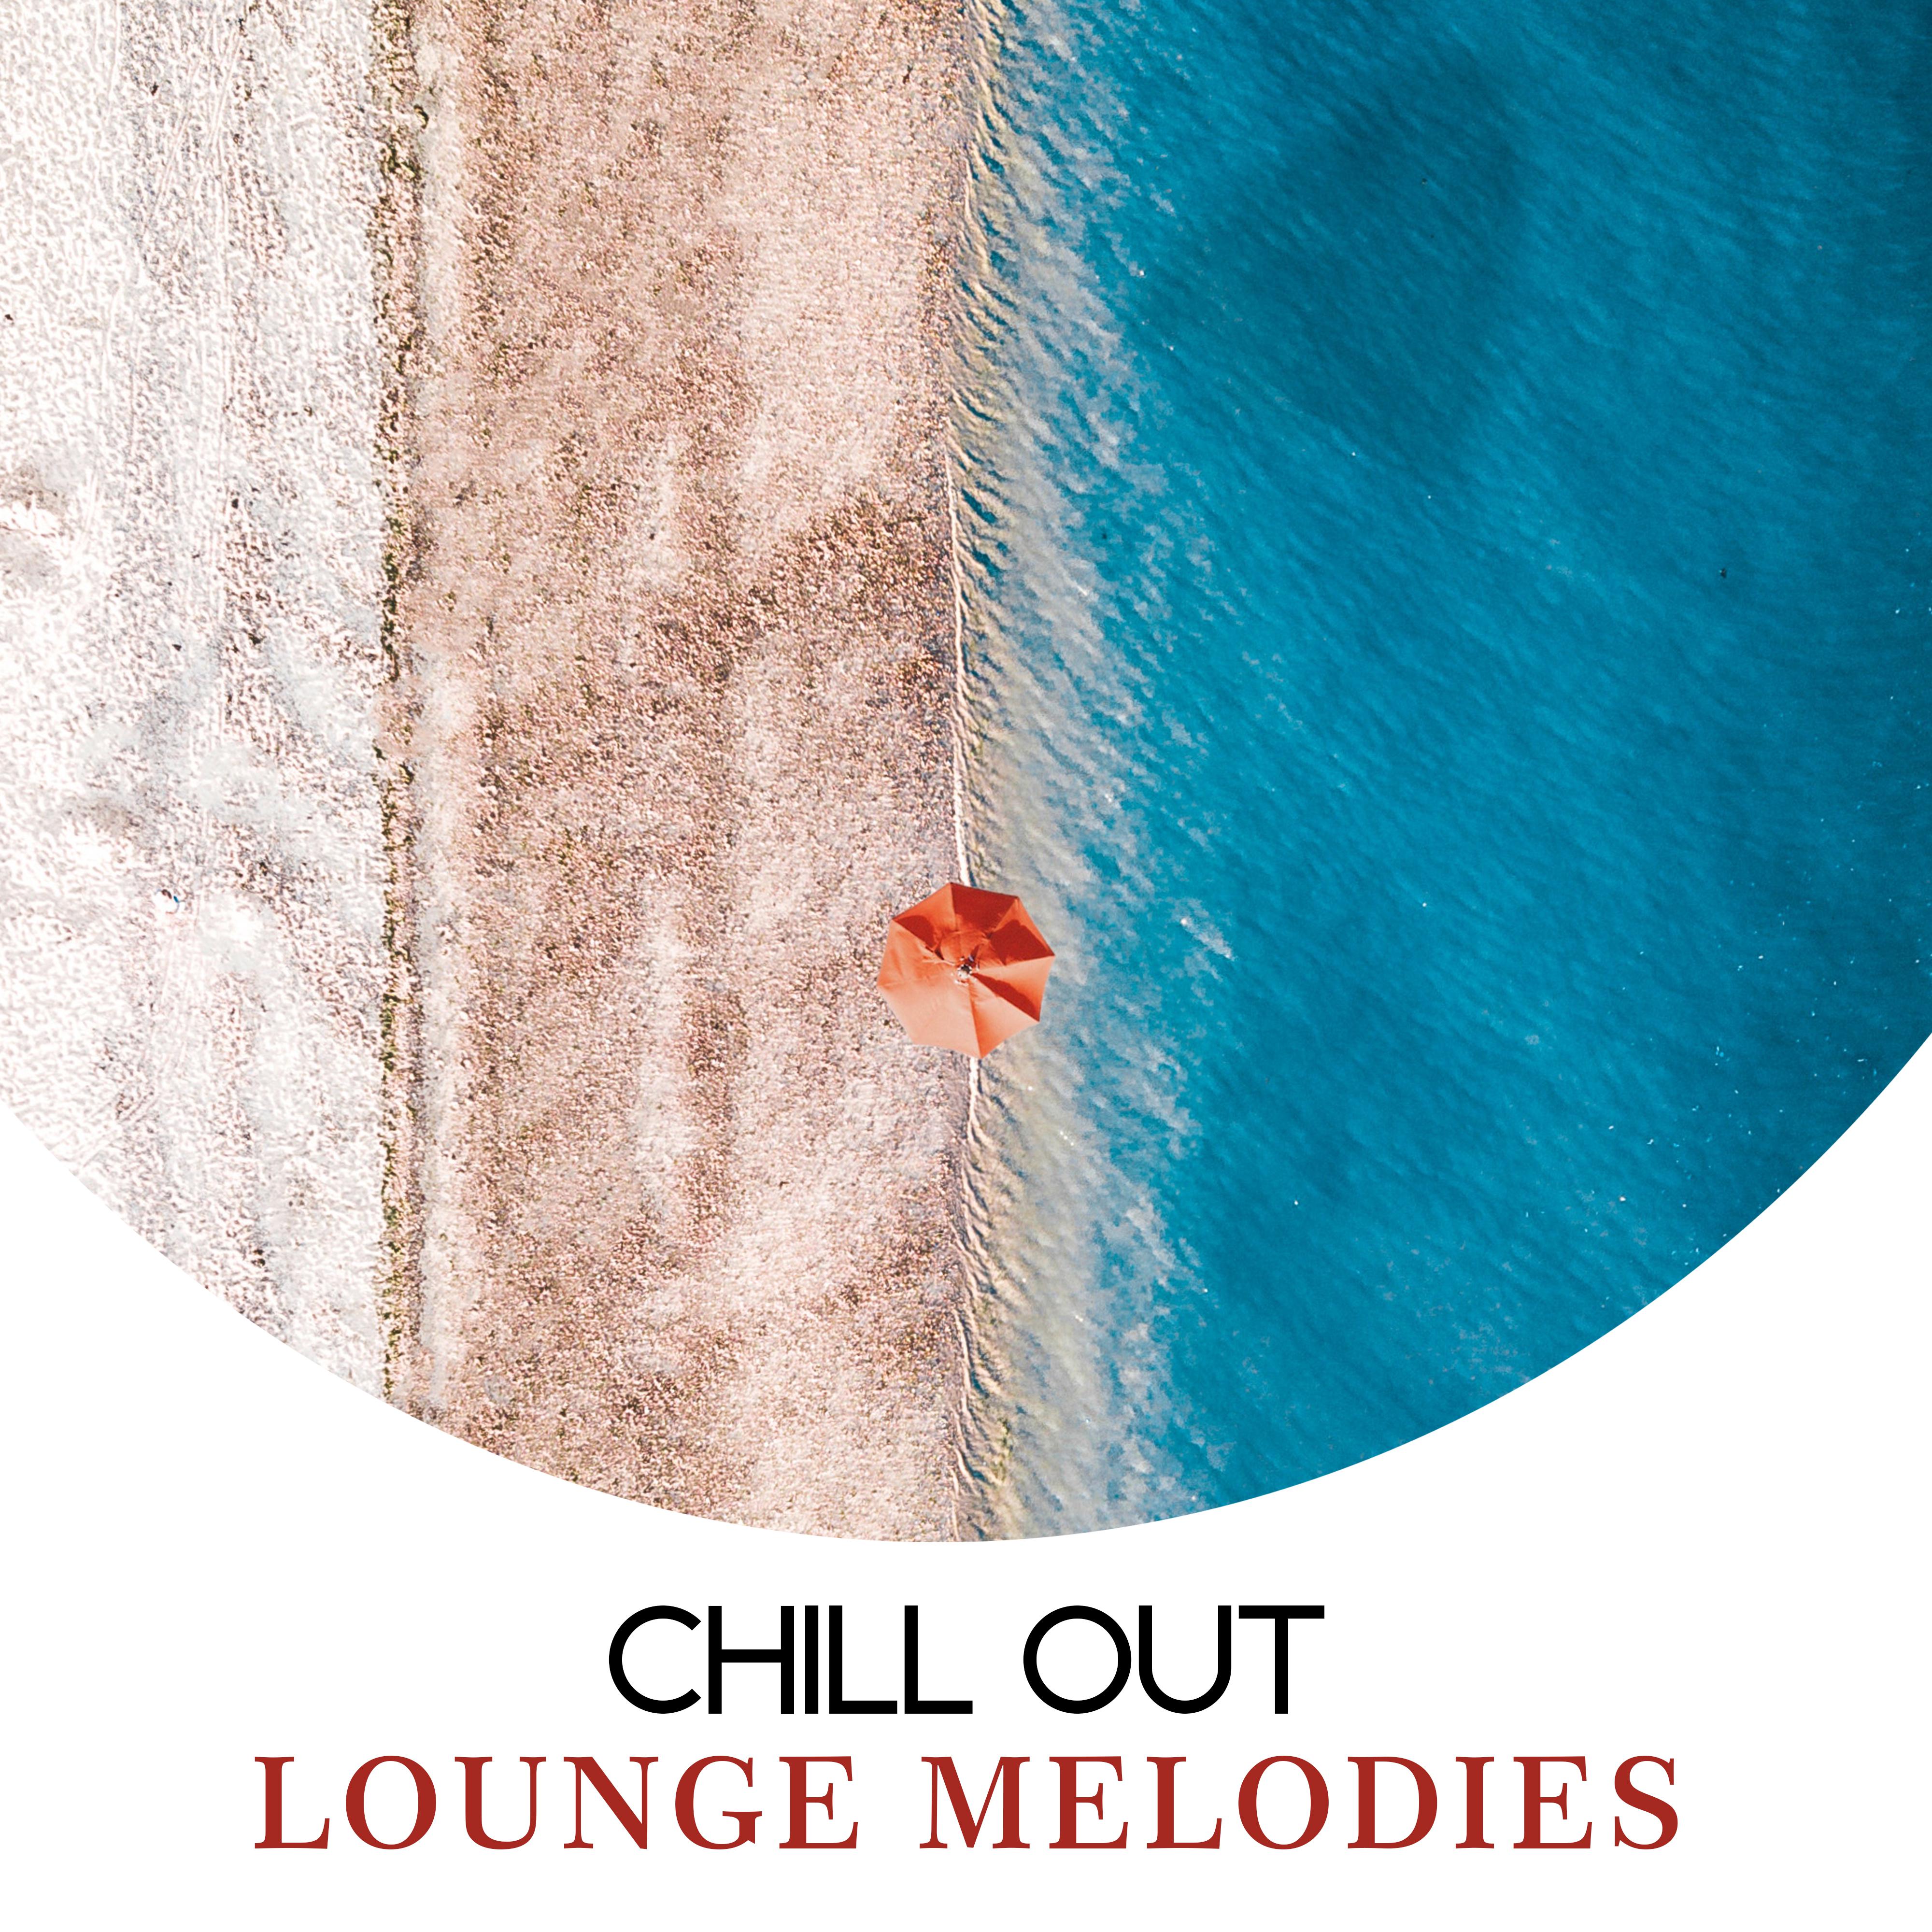 Chill Out Lounge Melodies